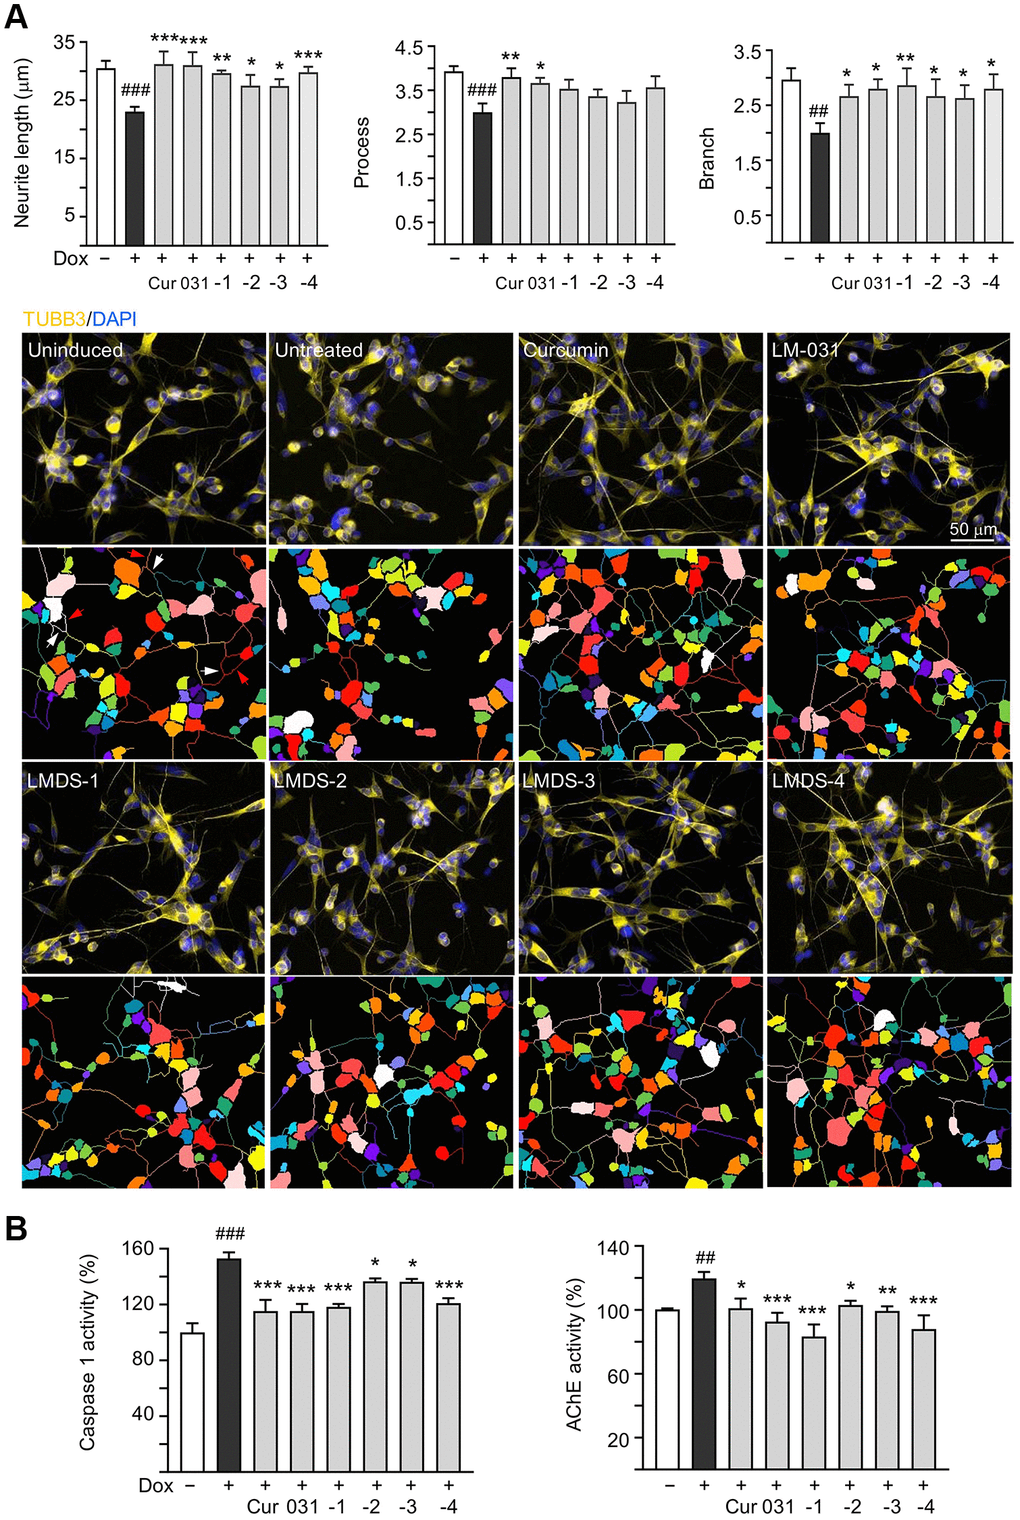 Neuroprotective effects of LM-031 and analogs in Aβ-GFP SH-SY5Y cells. (A) Neurite outgrowth (length, process and branch) assay of Aβ-GFP cells uninduced, untreated, or treated with curcumin, LM-031 or analogs at 5 μM (n = 3). Shown below are images of TUBB3 (yellow)-stained cells, with nuclei counterstained with DAPI (blue), and segmented images with multi-colored mask to assign each outgrowth to a cell body for quantification. In uninduced cells, processes and branches are indicated with red and white arrows, respectively. (B) Caspase 1 and AChE activity assays with curcumin, LM-031 or analogs (5 μM) treatment (n = 3). The relative caspase 1 or AChE activity of uninduced cells (Dox-) was normalized (100%). P values: comparisons between induced (Dox+) vs. uninduced (Dox-) cells (##P ###P *P **P ***P post hoc Tukey test).